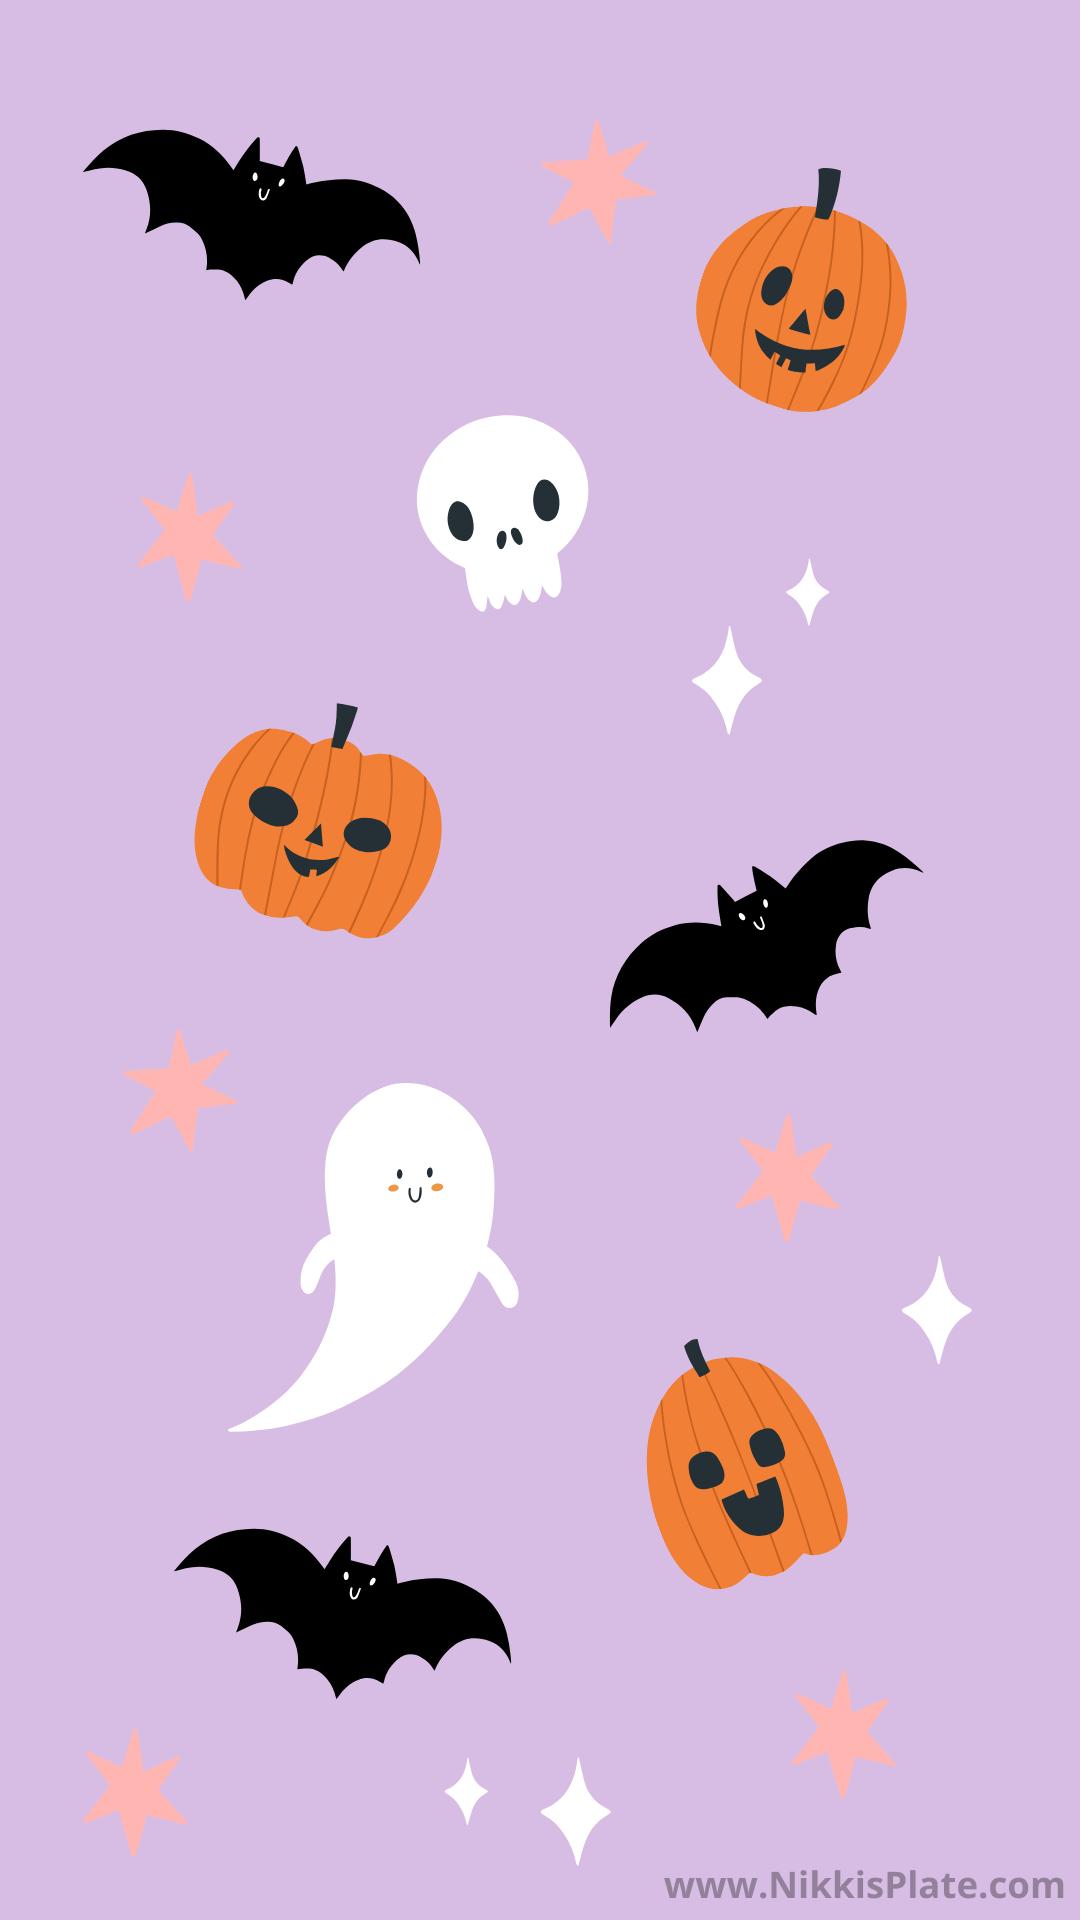 Get ready to add a spooky touch to your iPhone with my roundup of 30 cute Halloween iPhone Wallpaper Backgrounds. From cute pumpkins to eerie witches, I have something for everyone! Embrace the Halloween spirit—no cost, no tricks, just visually appealing treats. Dazzle your screen with Halloween wallpaper iPhone backgrounds if you dare!